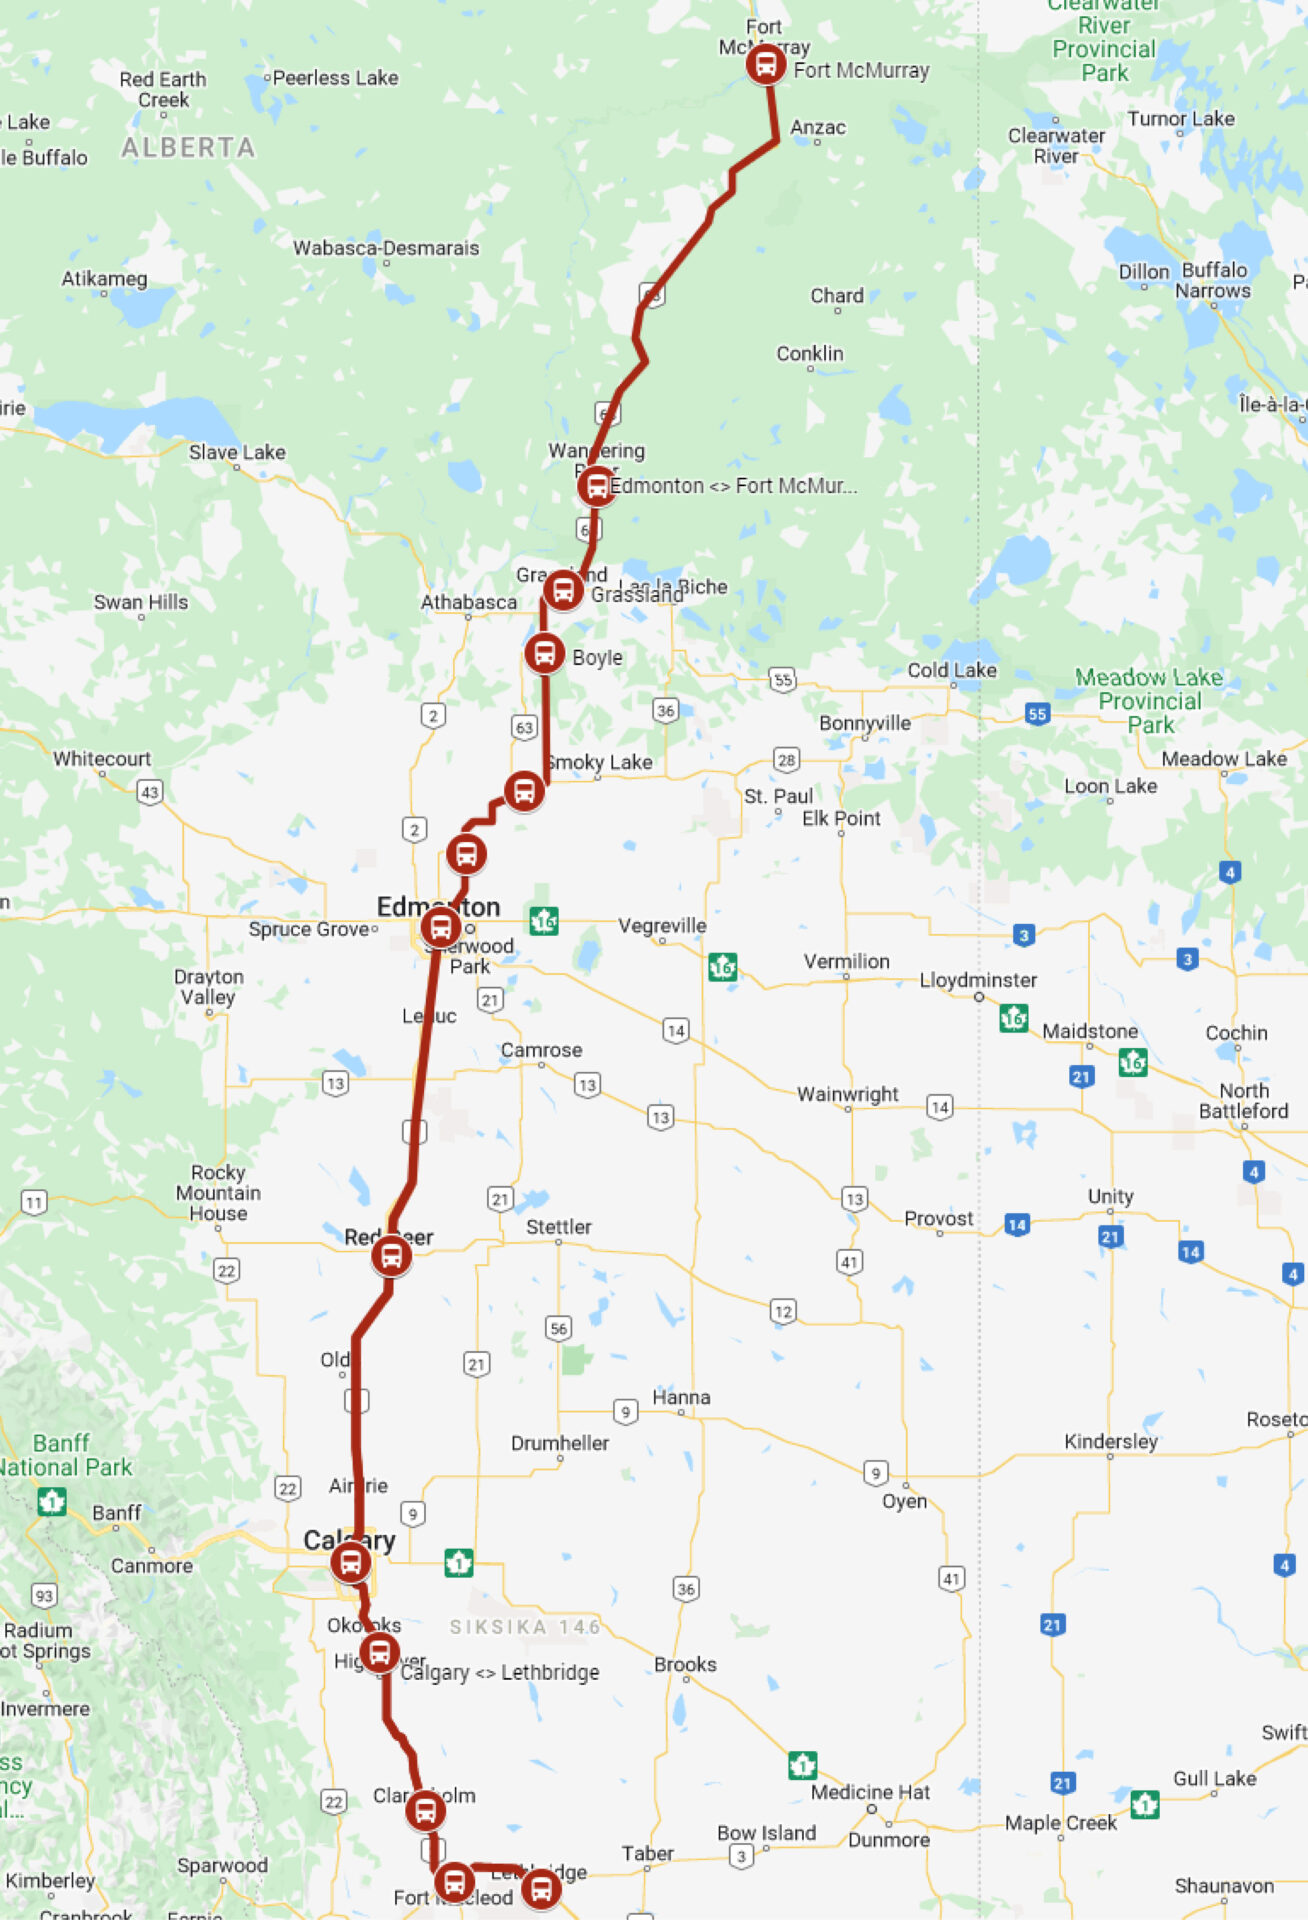 Lethbridge to Fort McMurray - Red Arrow